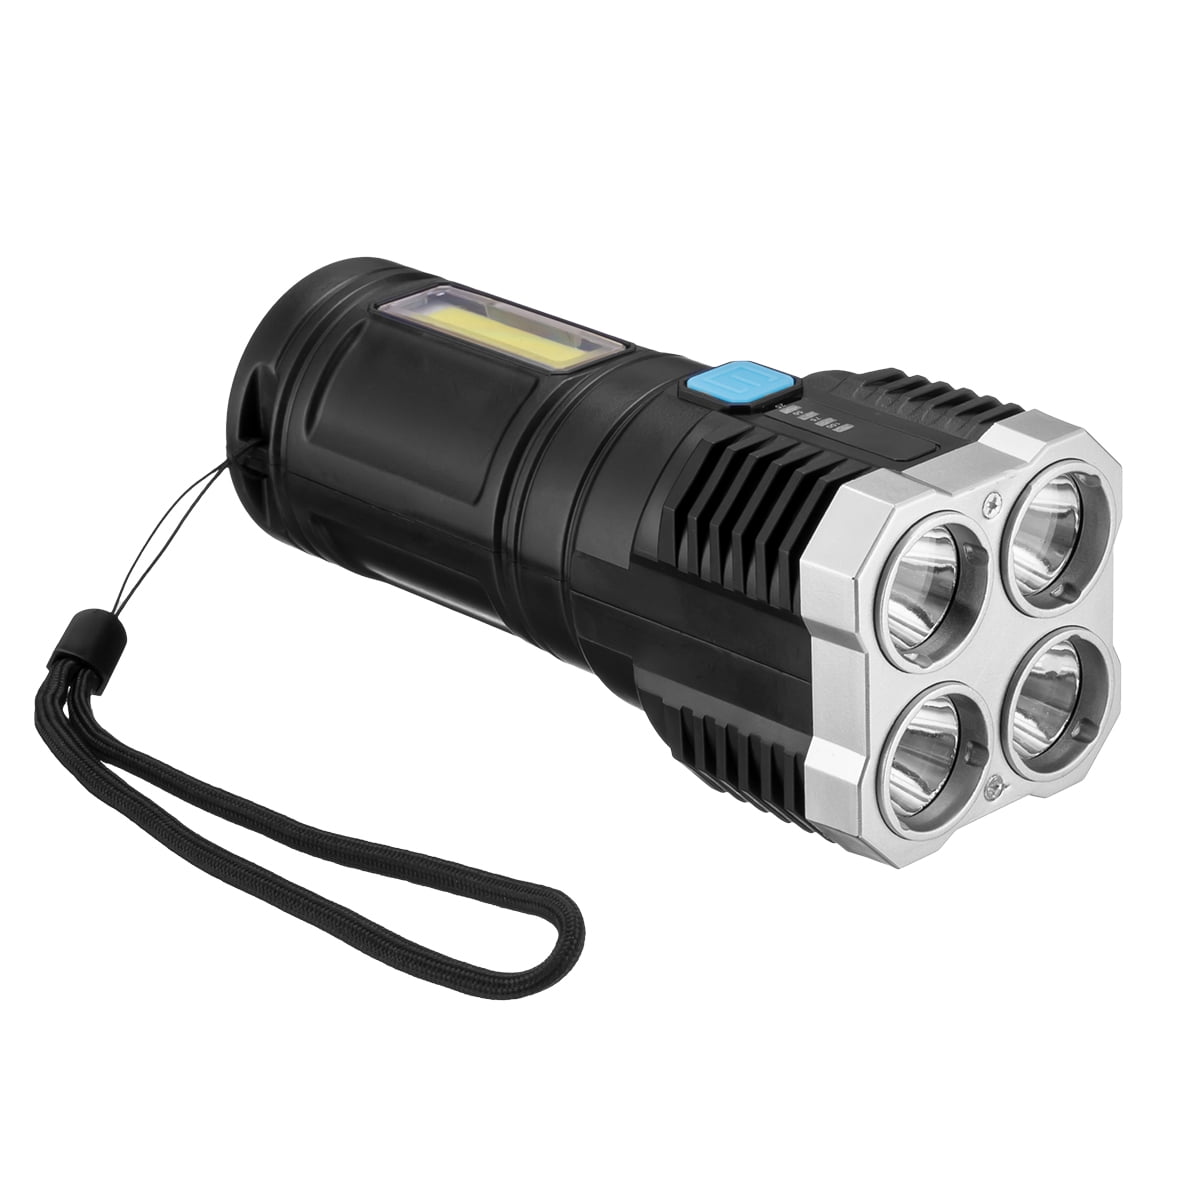 TACTICAL FLASHLIGHT LED Torch Light Super Bright USB Rechargeable Camping Lamp 